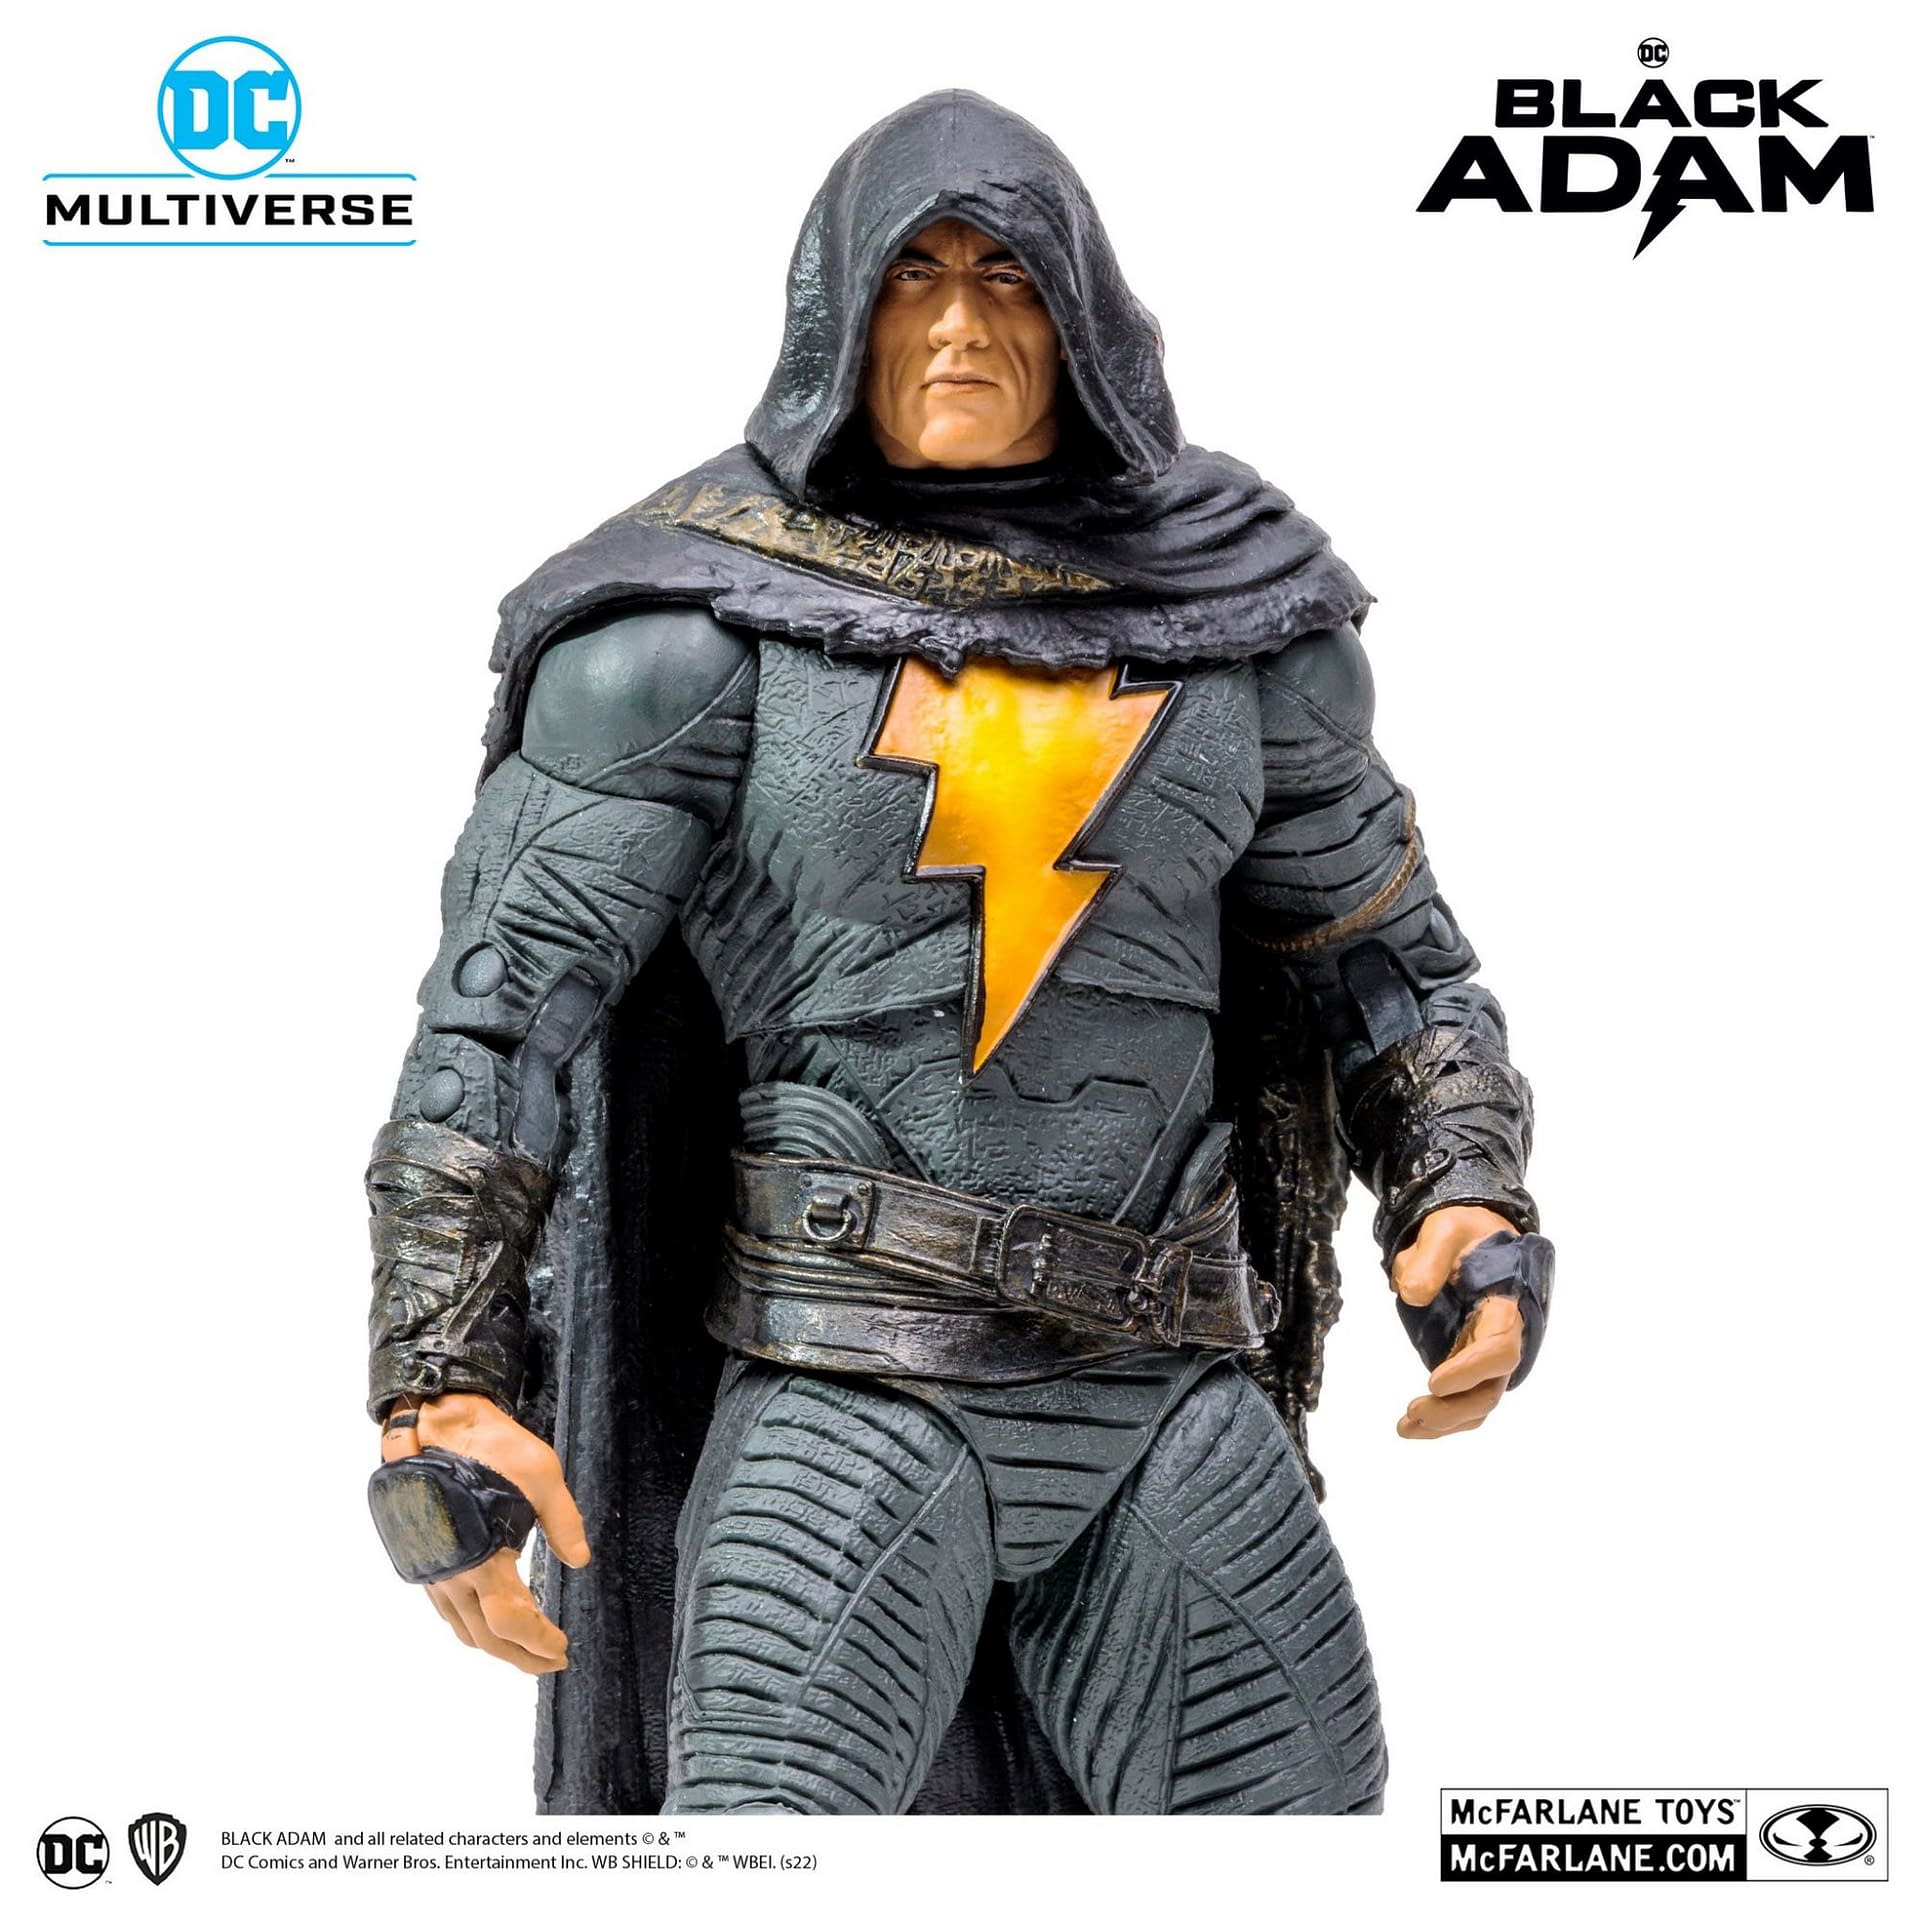 Pre-orders Arrive For Two Black Adam Figures from McFarlane Toys 